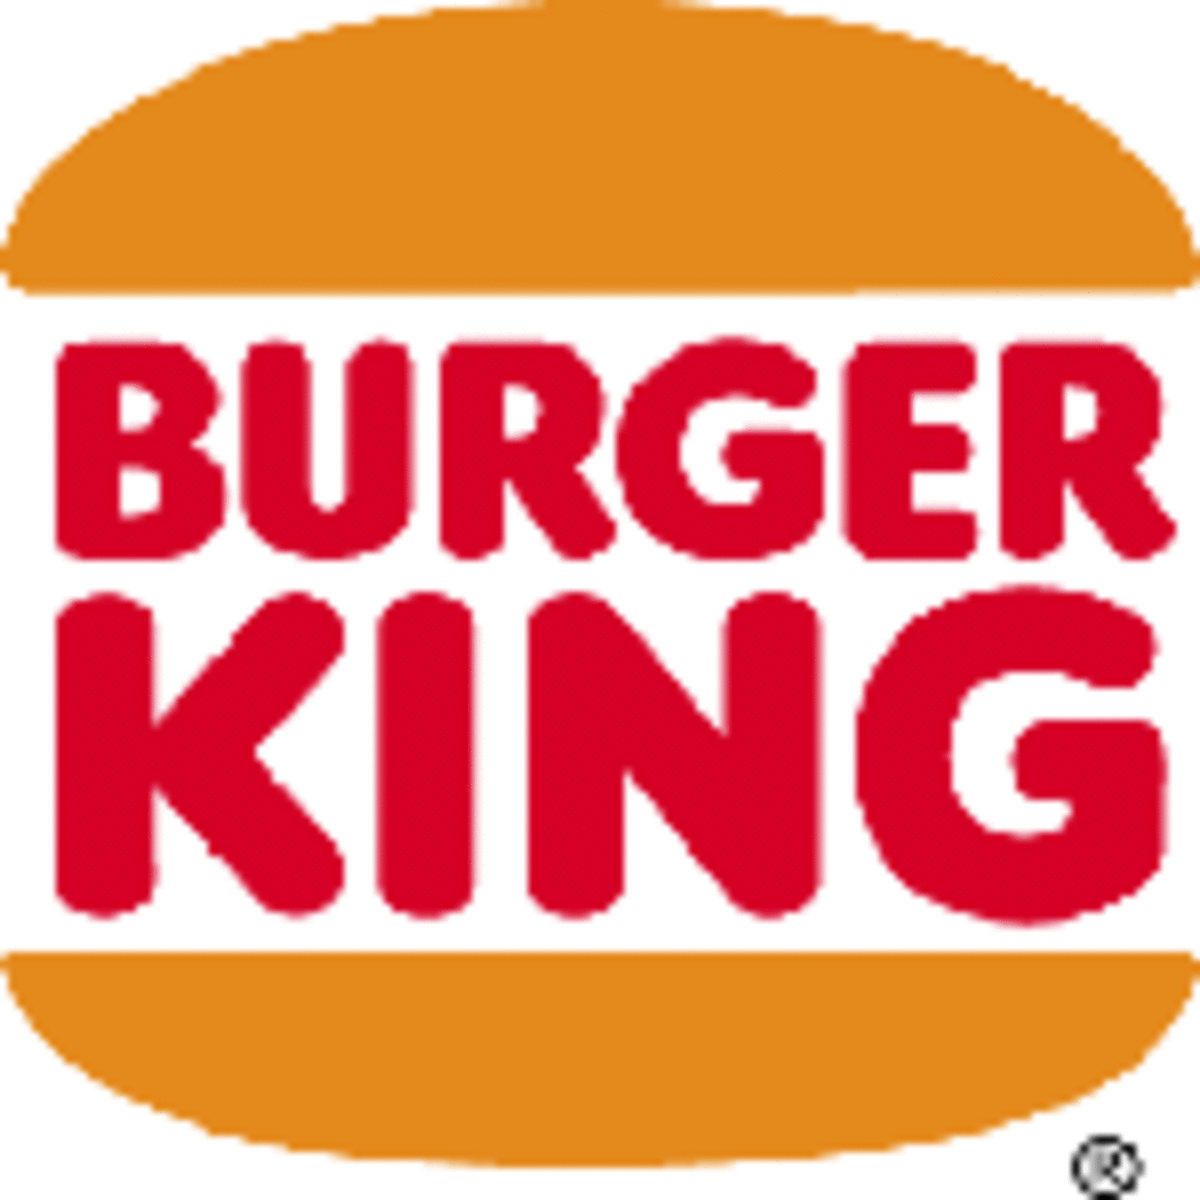 Did You Know That Satan Could Work For Burger King?